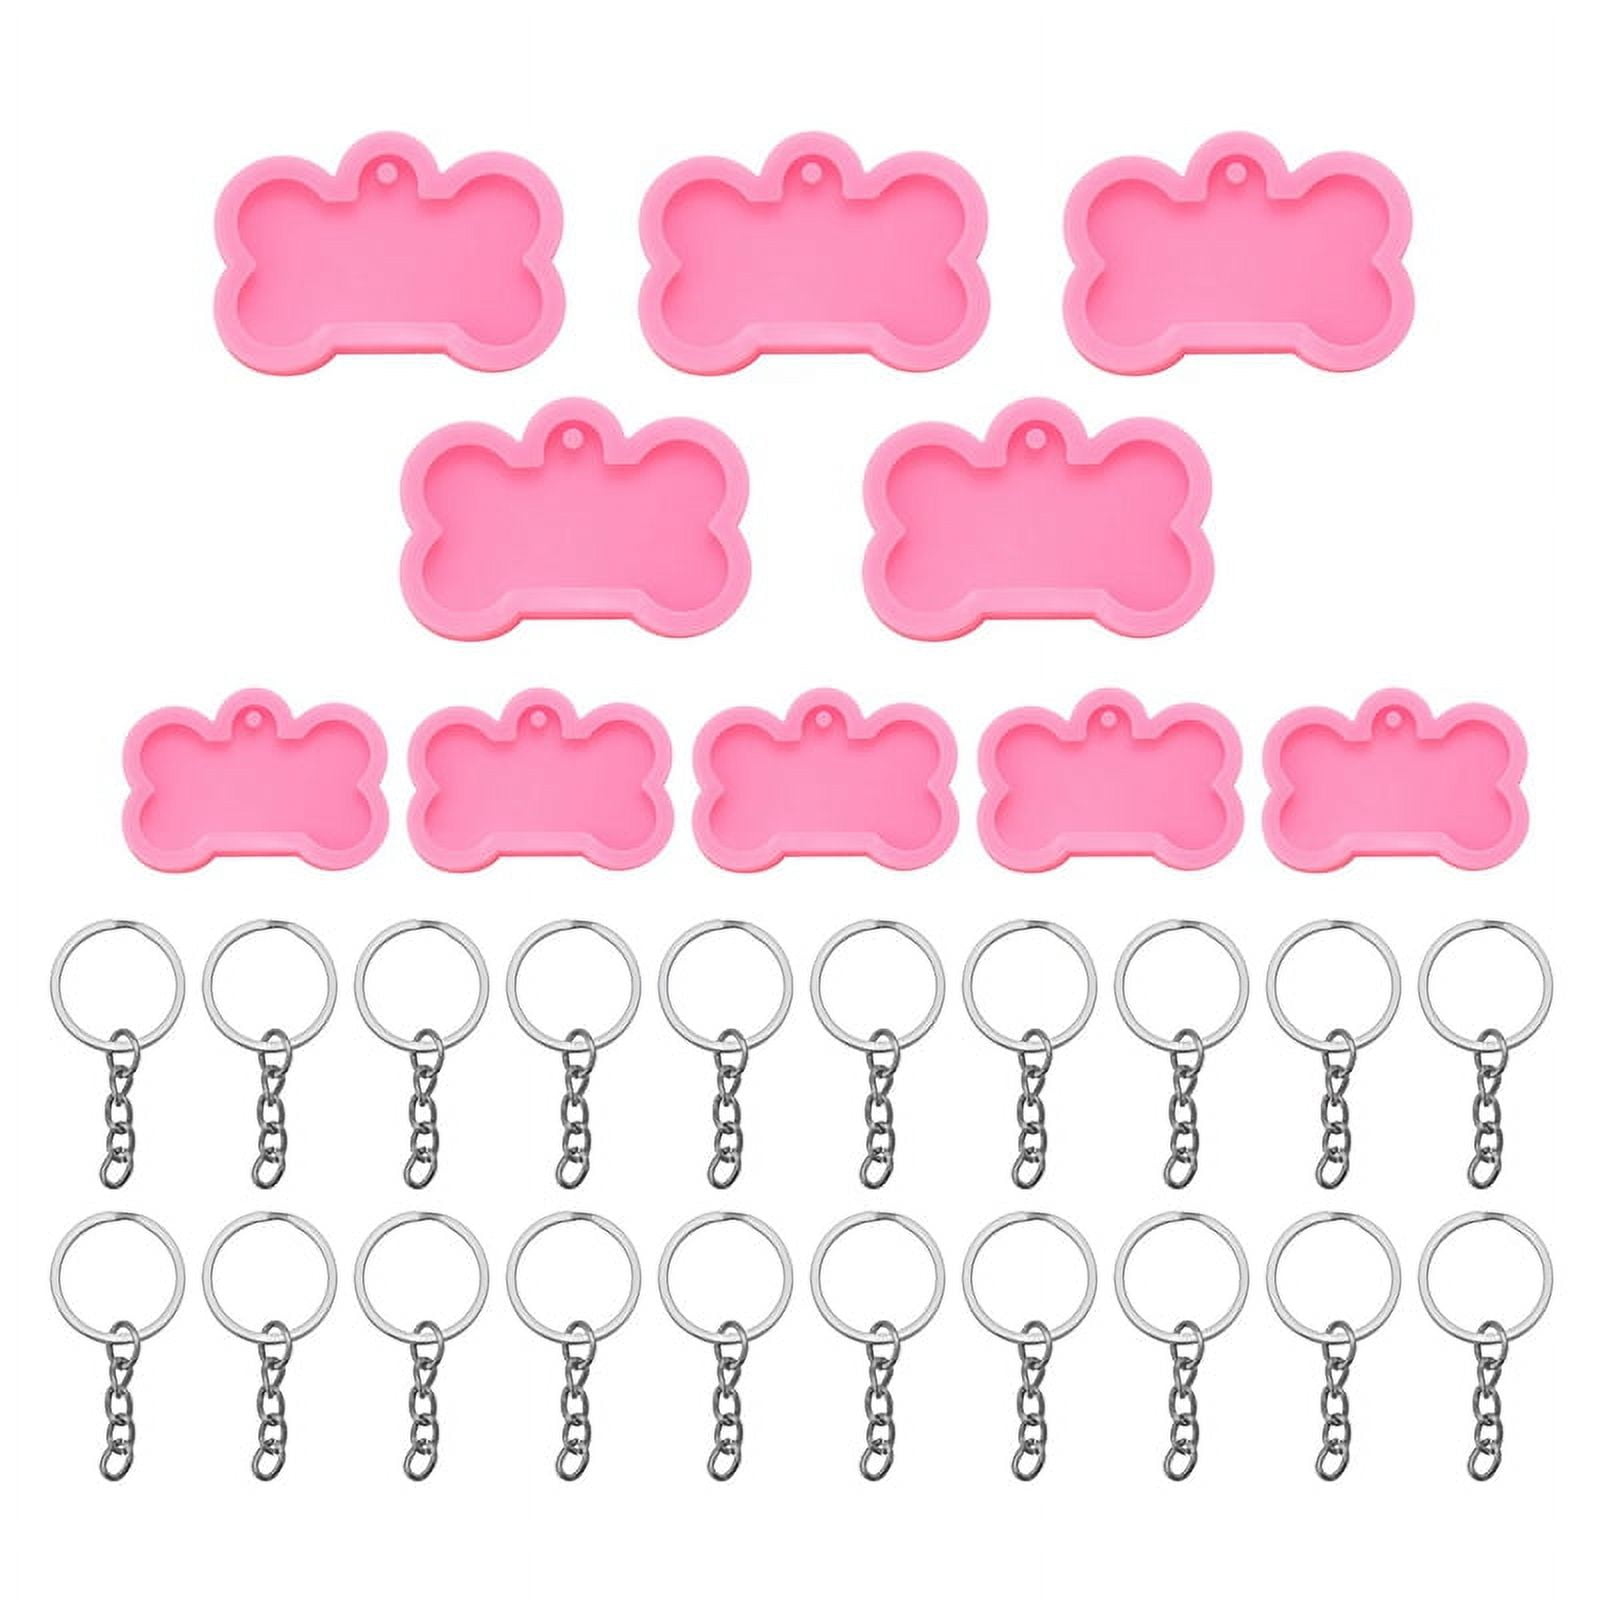 JEZOMONY Pet Tag Resin Mold, 2 Pack Dog and Cat Tag Molds for Resin, Dog  Bone Cat Shaped Keychain Silicone Resin Molds with 30Pcs Keychains DIY  Crafts